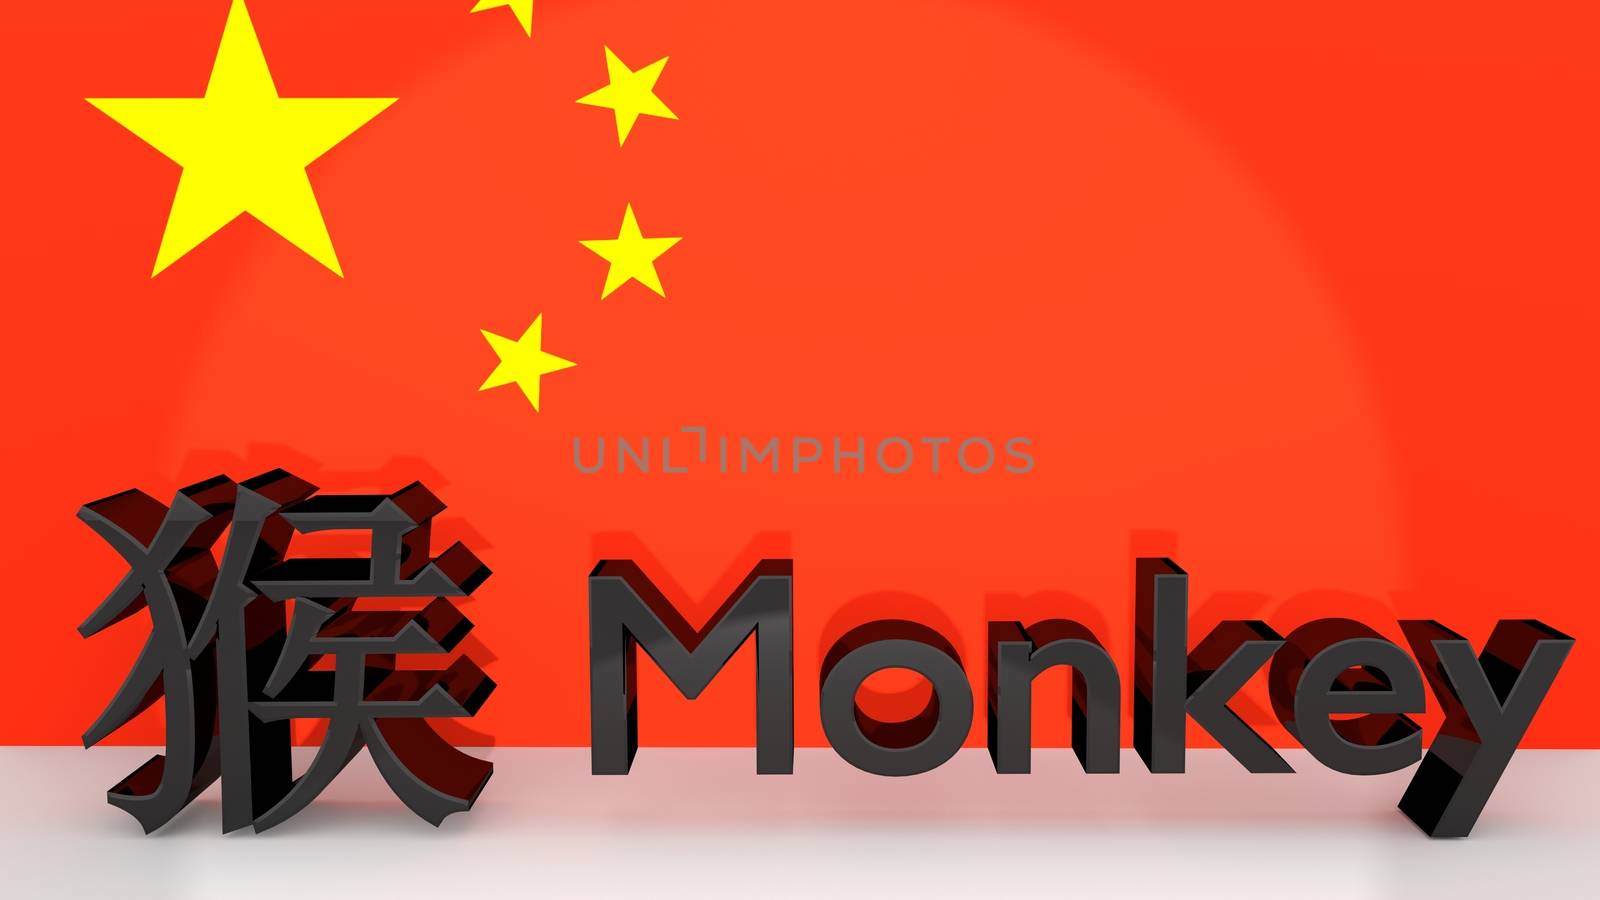 Chinese characters for the zodiac sign Monkey with english translation made of dark metal in front on a chinese flag.